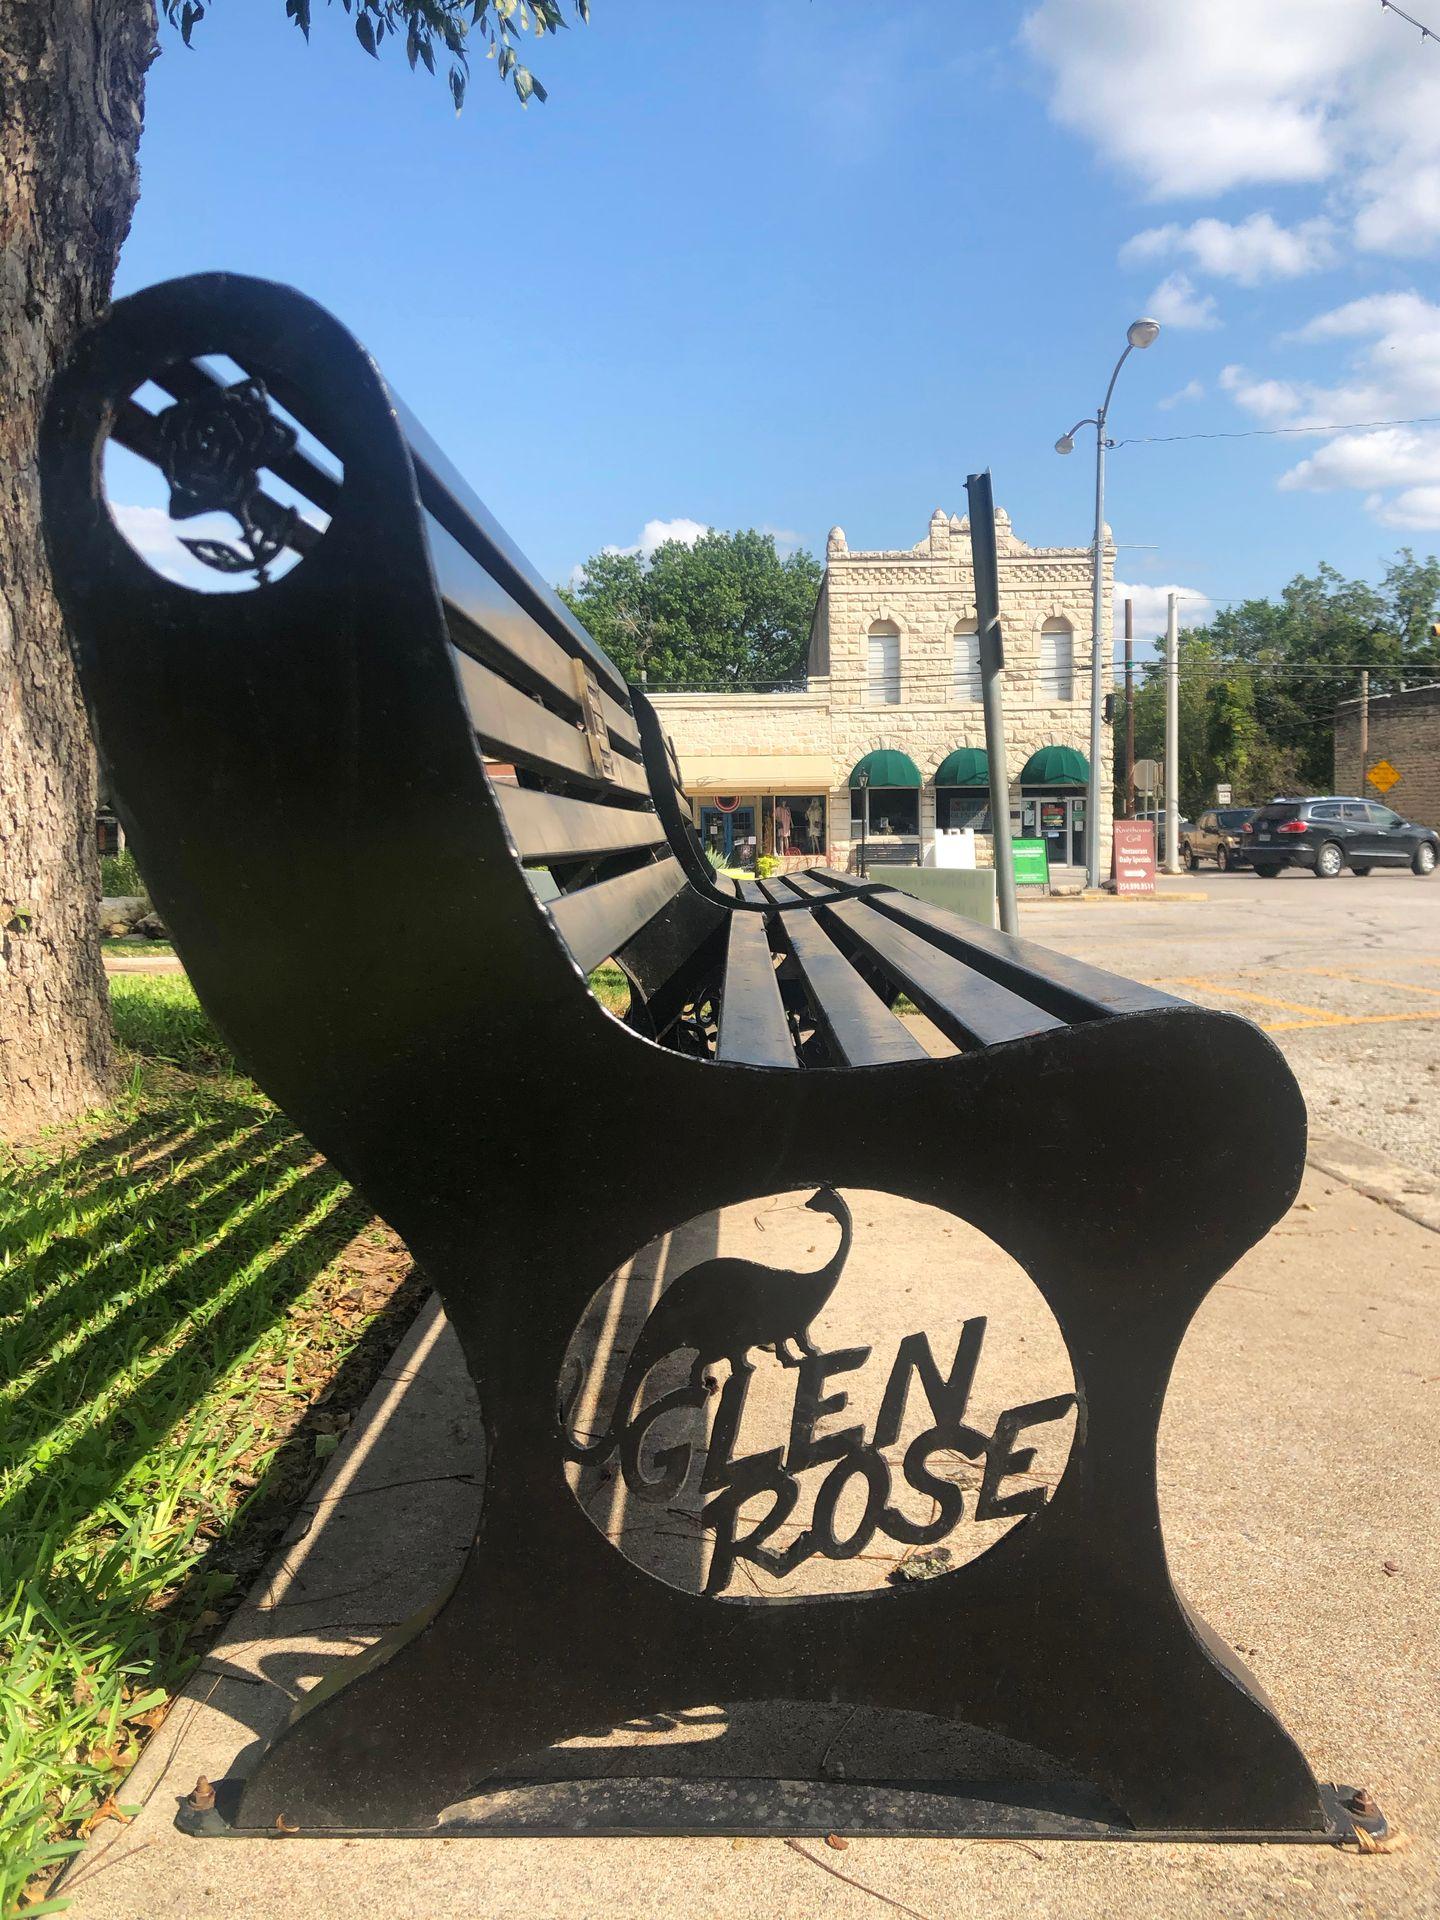 A bench in Glen Rose with a dinosaur design on the side.